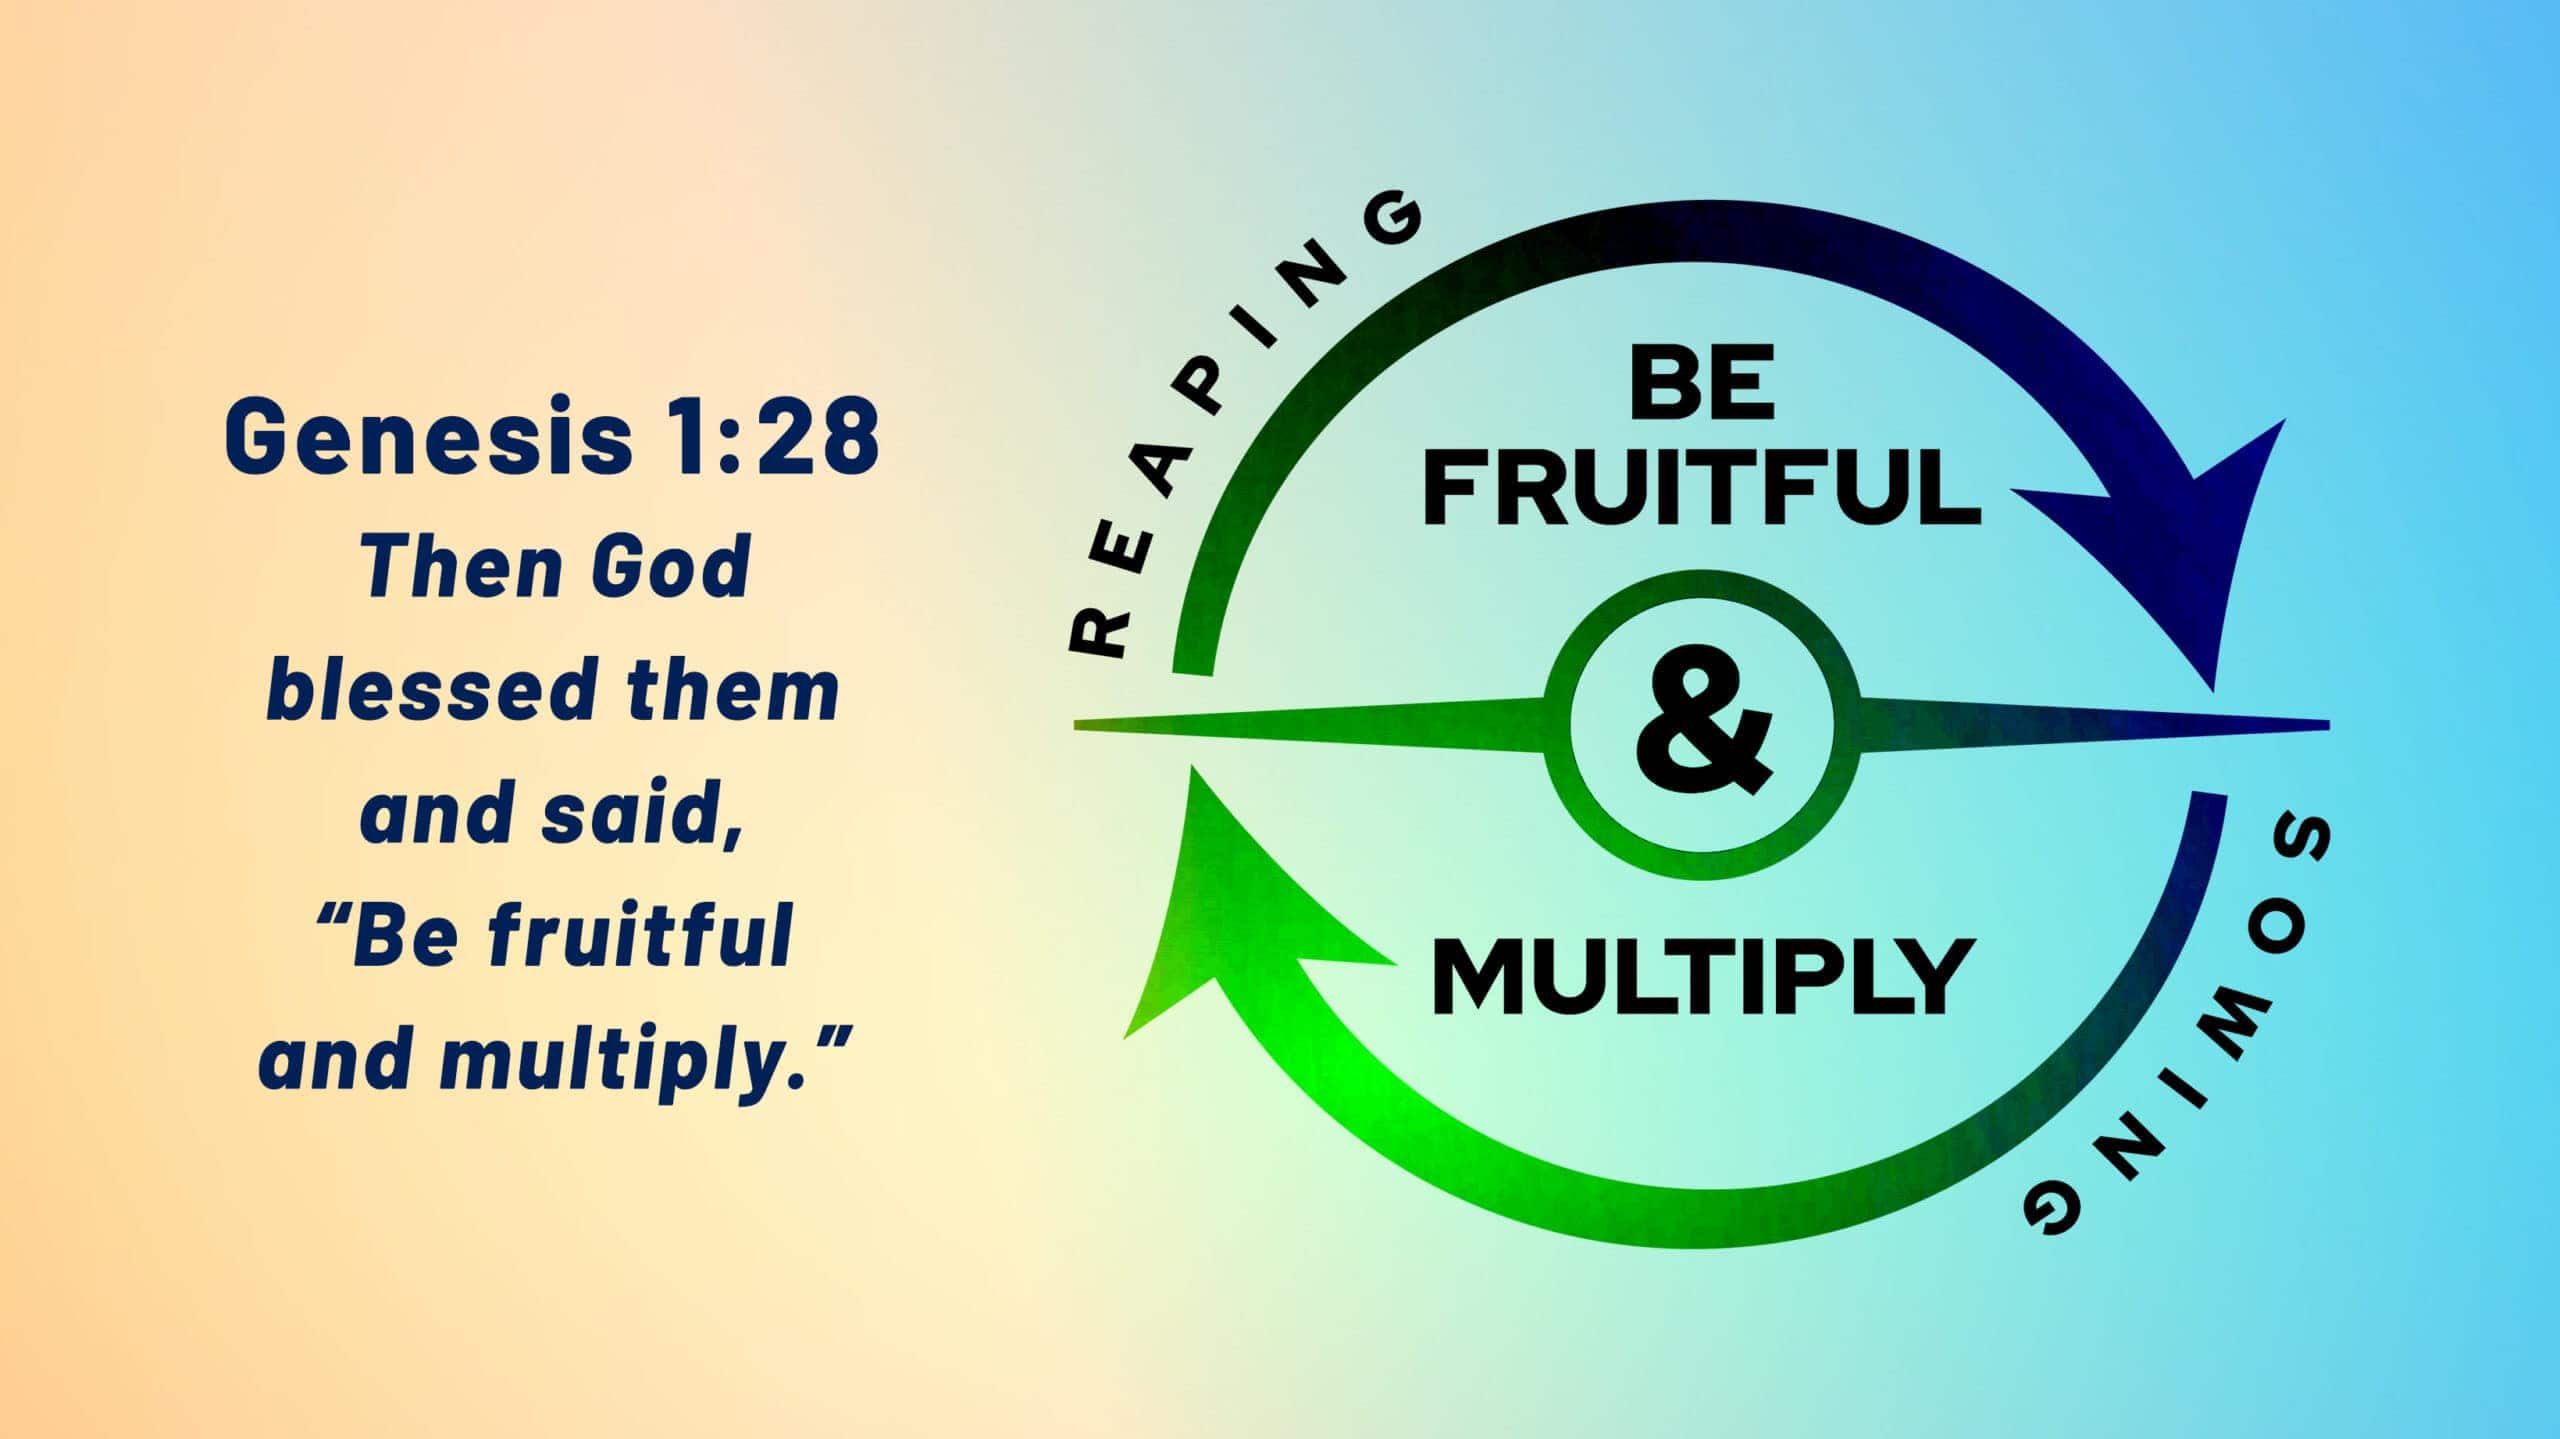 Be fruitful and multiply - the cycle of God's blessing